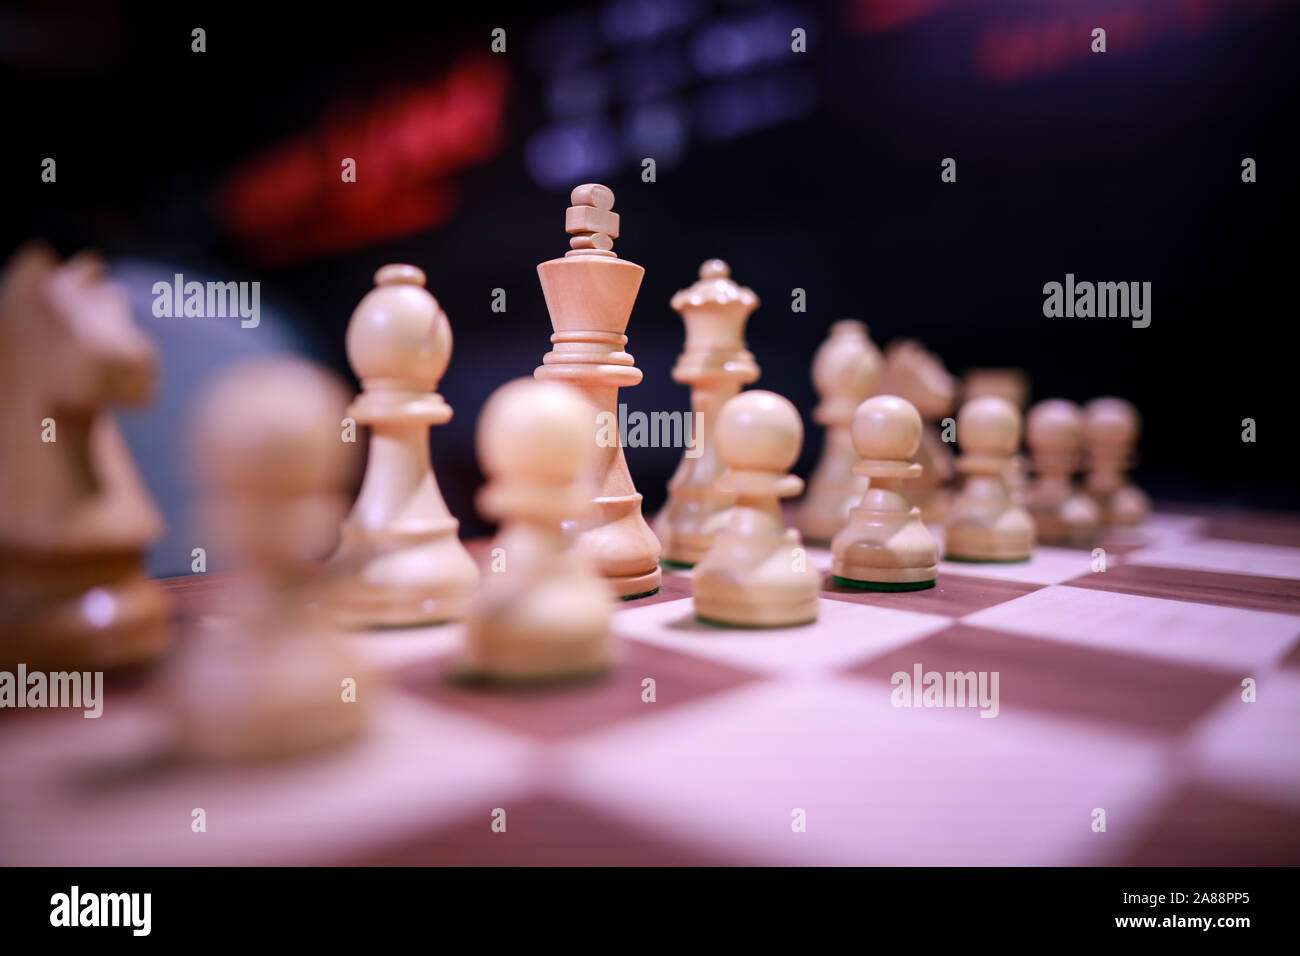 Shallow depth of field (selective focus) image with wooden chess pieces on a wooden table before a professional competition. Stock Photo